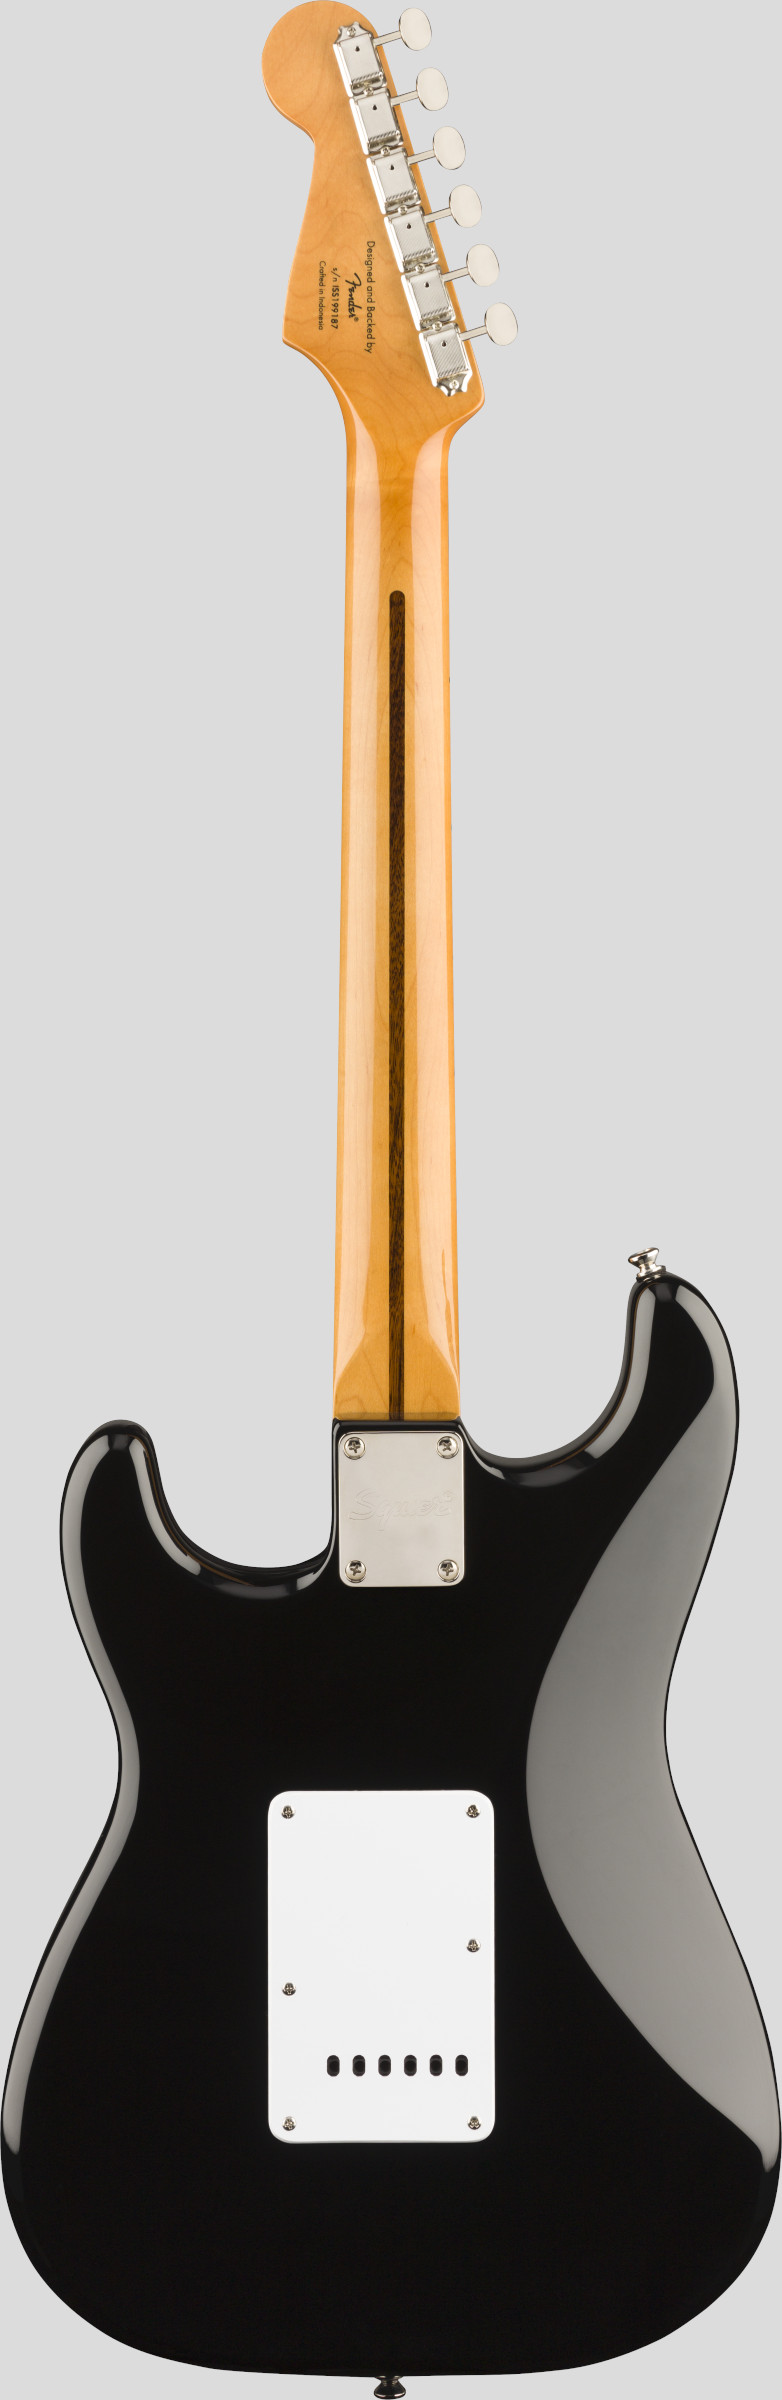 Squier by Fender Classic Vibe 50 Stratocaster Black 2